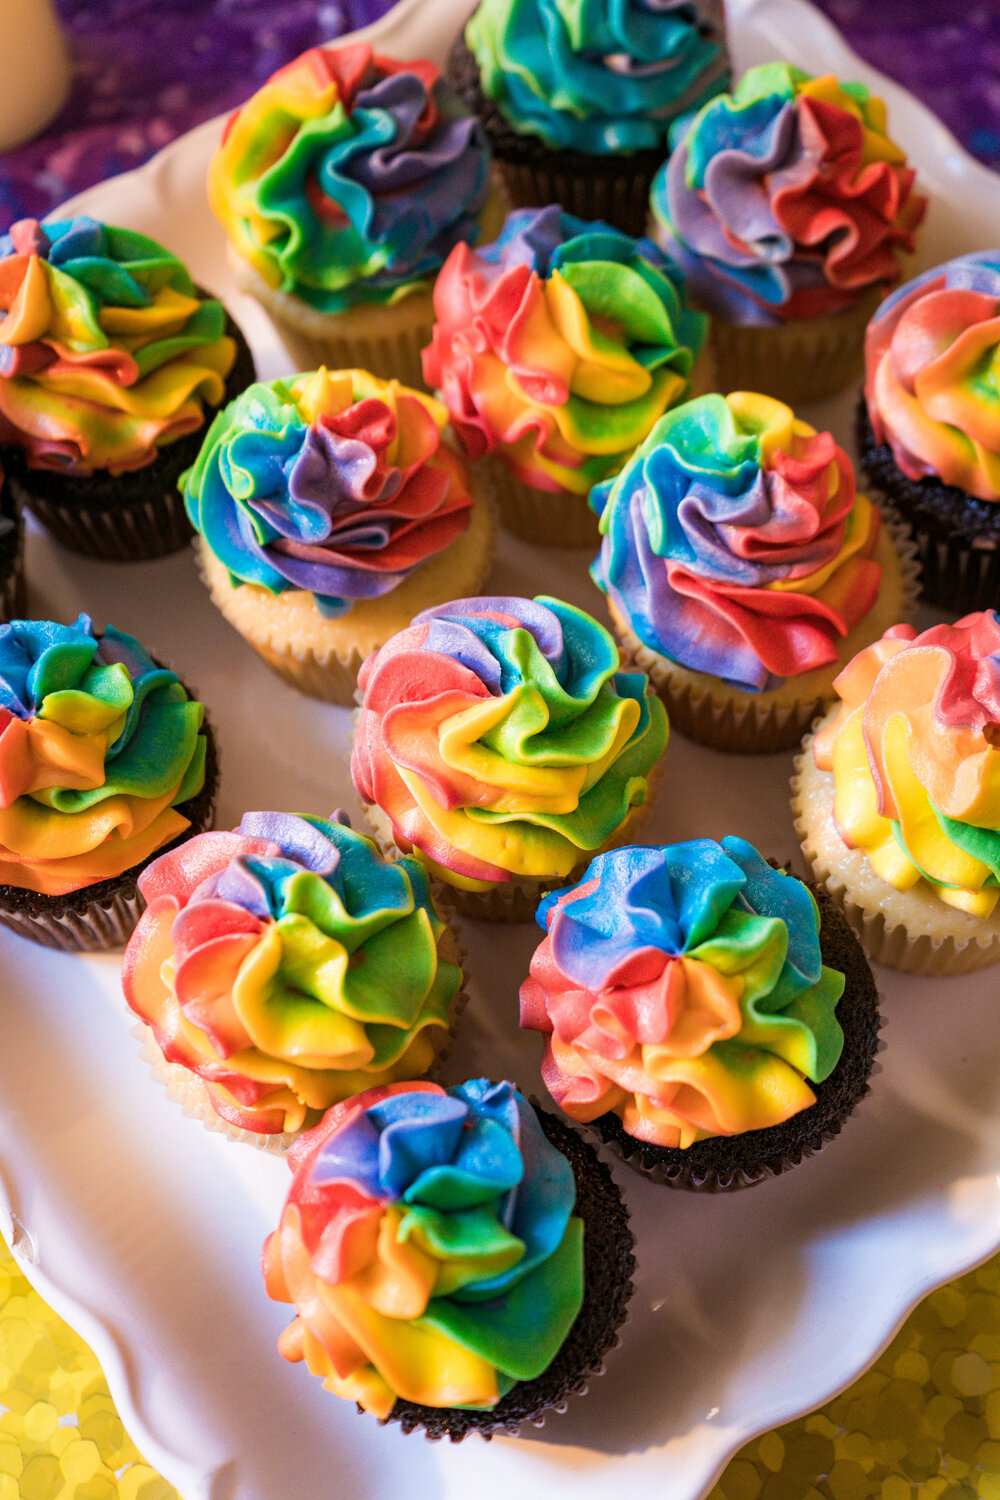 Rainbow cupcakes, courtesy of Dawn’s Delectables, were available to Queer Prom attendees at Mineral School on Saturday, Sept. 9. “These were served at Centralia Pride and were a huge hit,” the Dignity Guild stated.